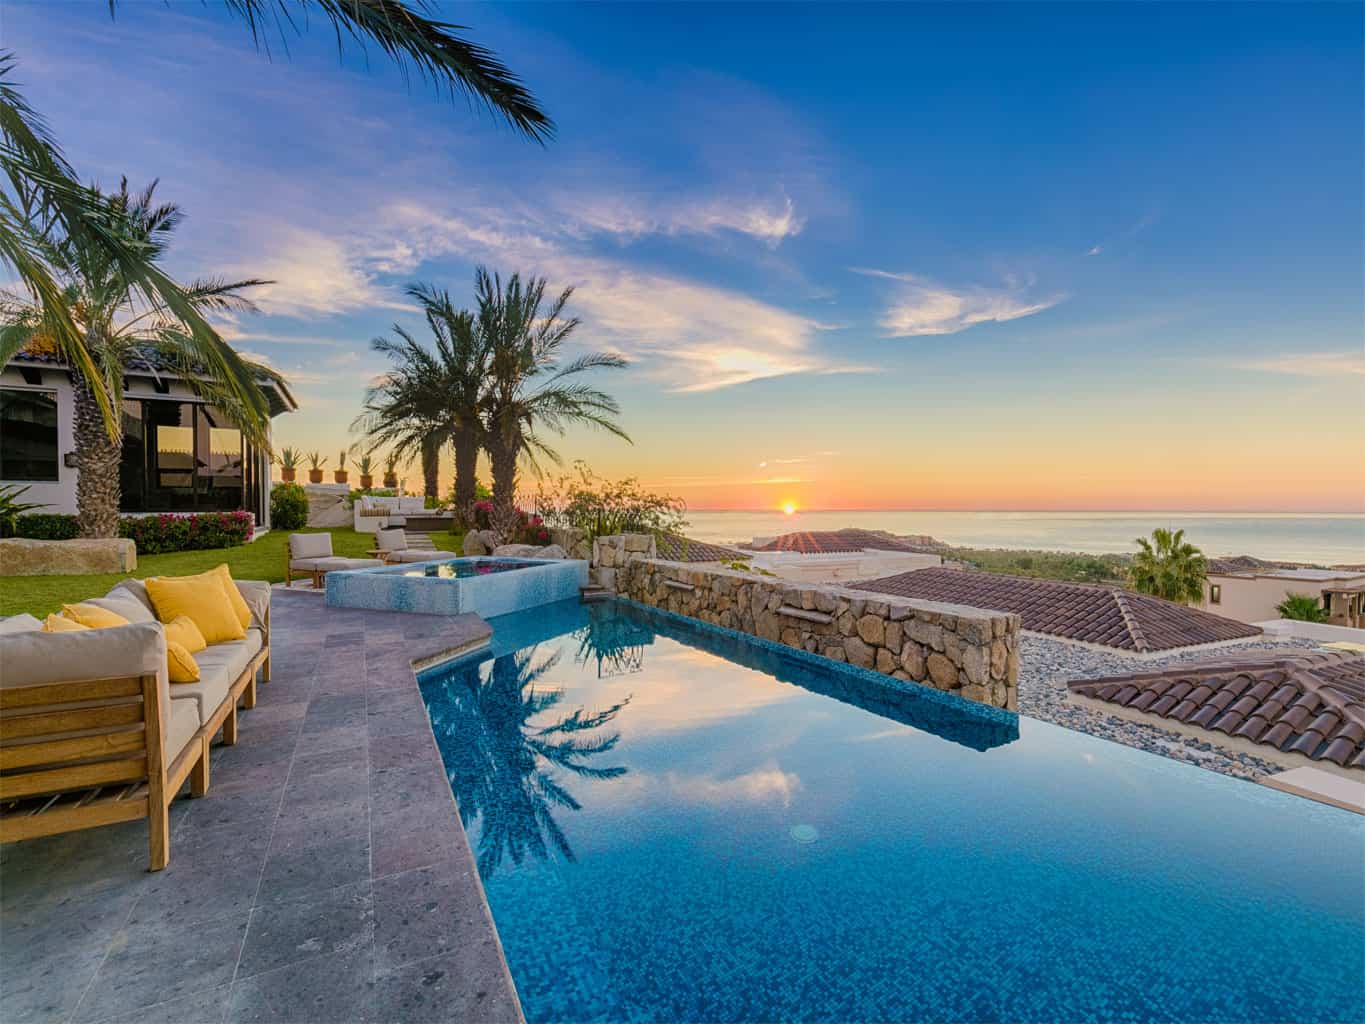 Beachfront home in los cabos and sunset looking over the pool